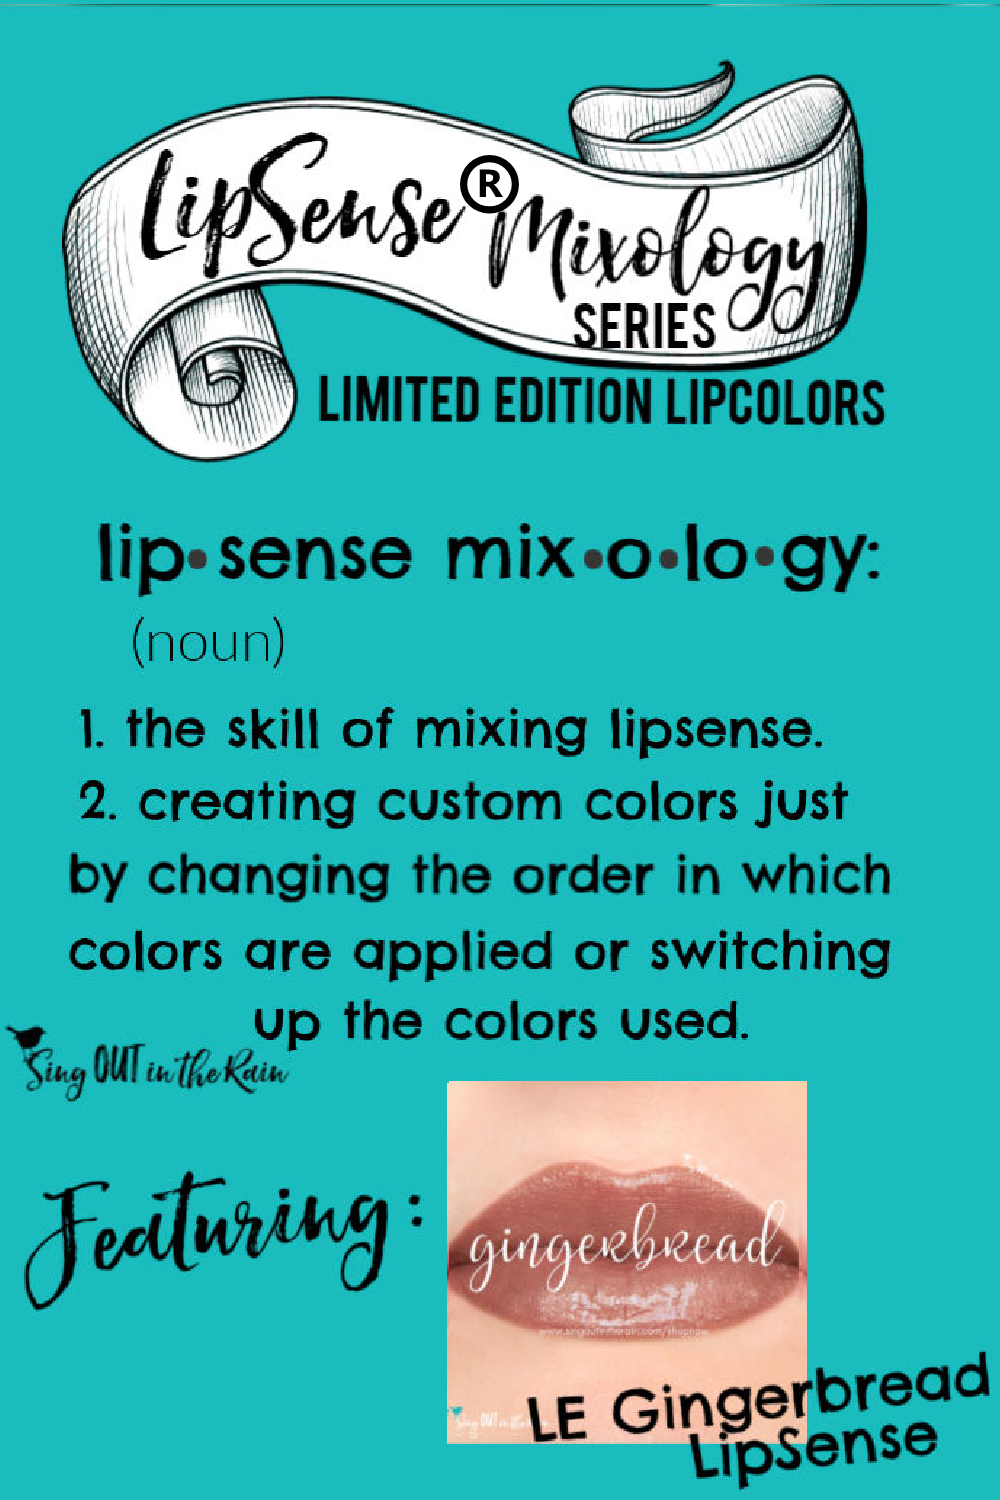 The Ultimate Guide to Gingerbread LipSense Mixology